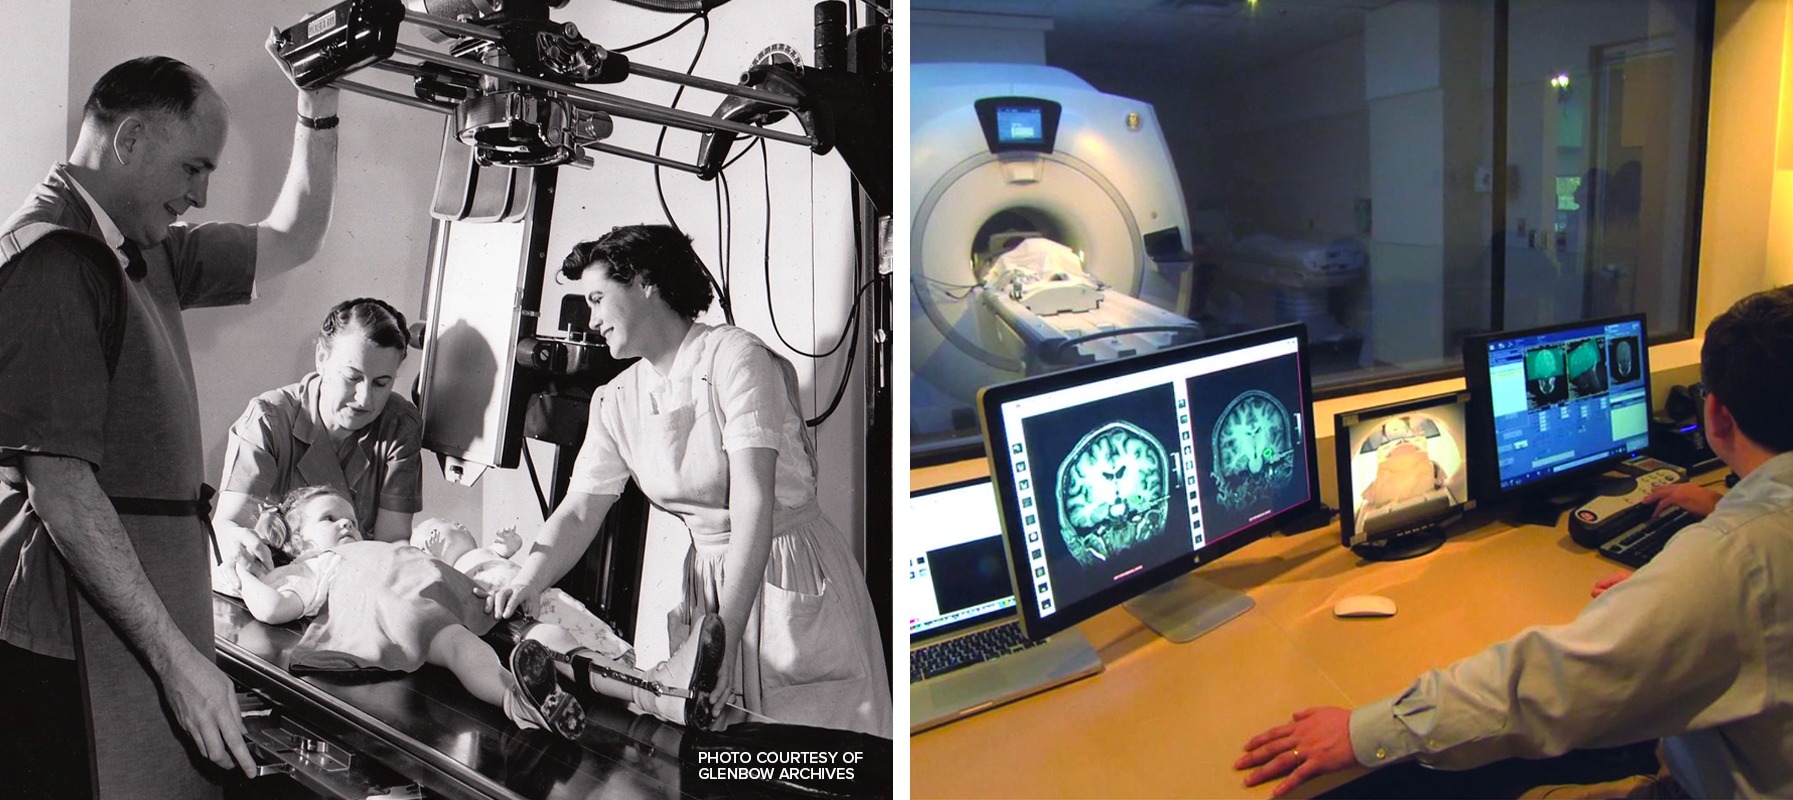 Diagnostic Imaging from the mid 1900s vs the 2000